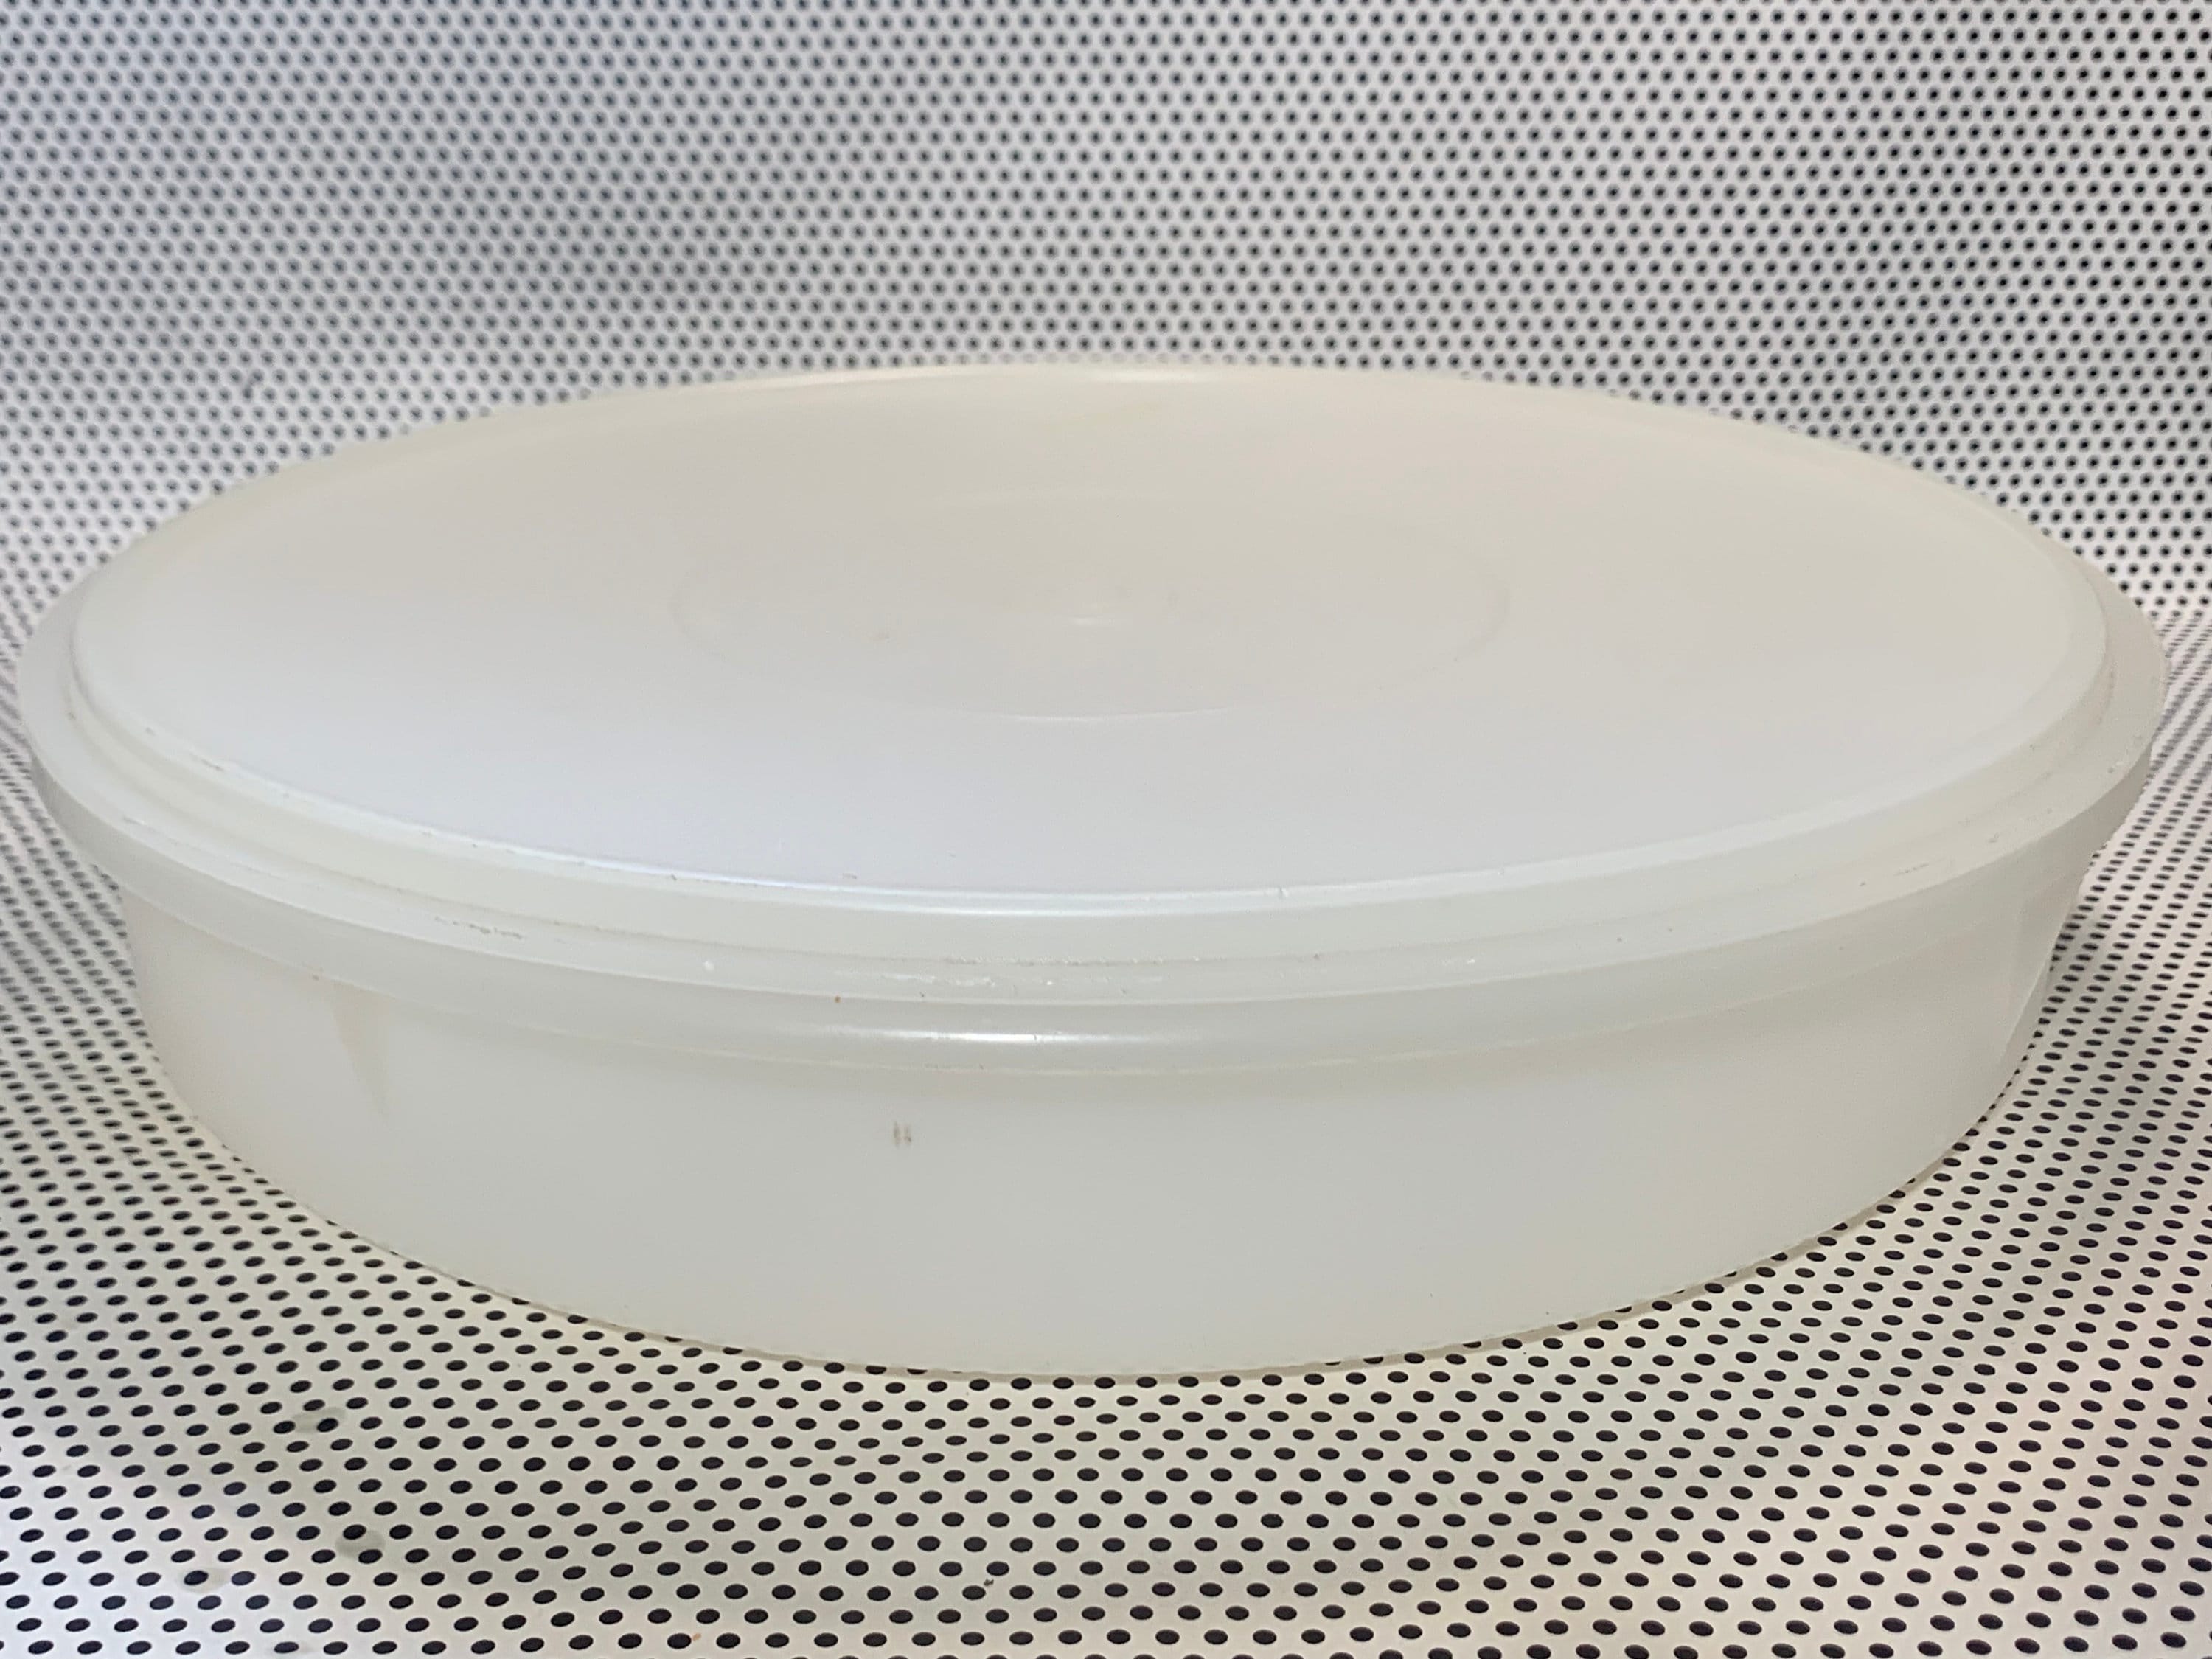 Vintage Tupperware Large Round Container & Lid. White. Cake Taker 